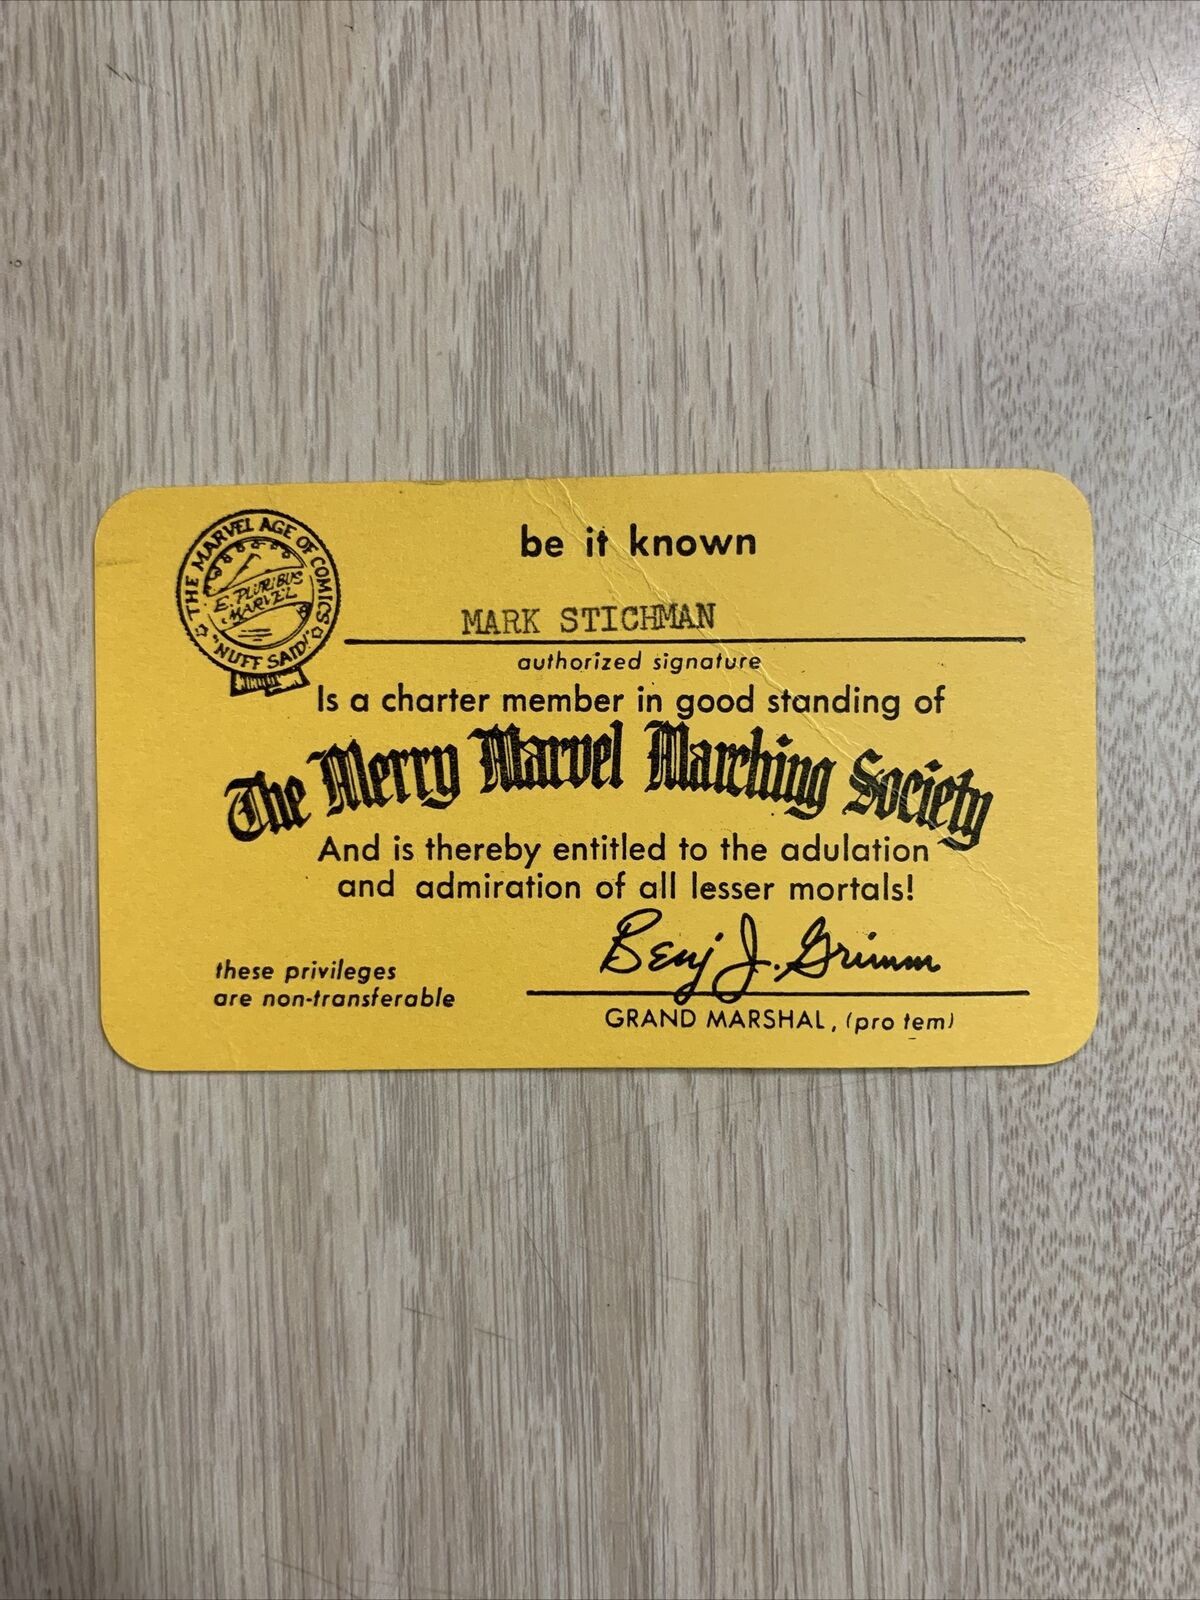 \'64 MMMS MEMBERSHIP CARD EXTREMELY RARE #655 MERRY MARVEL MARCH MARCHING SOCIETY